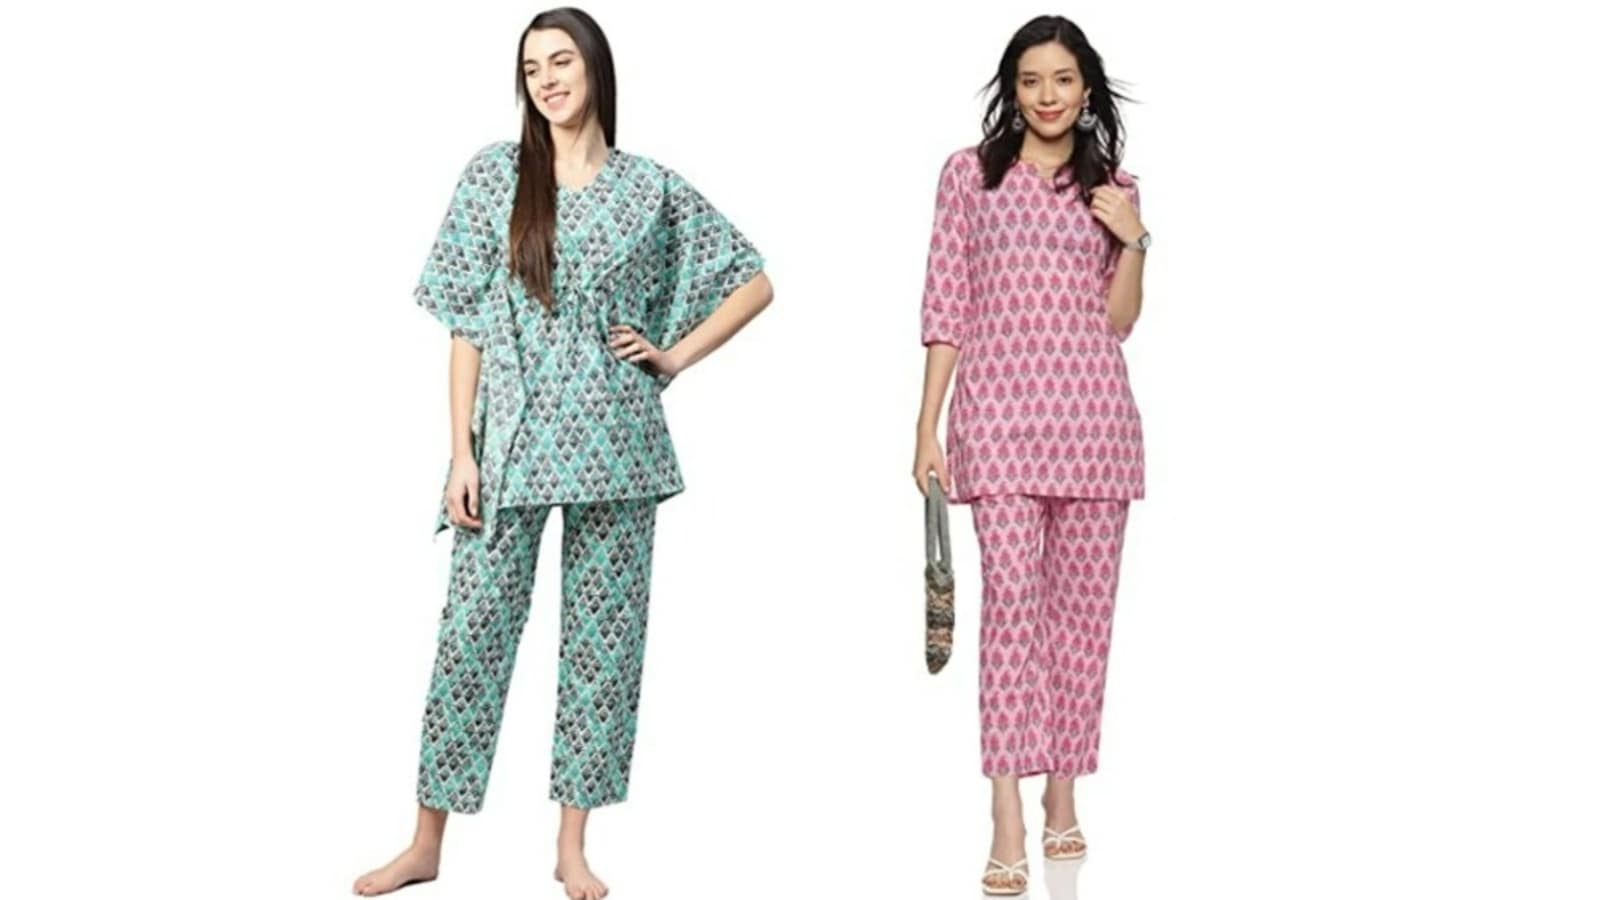 Buy Romaisa Women's Satin Nightwear (Set of 2 pcs_Nighty with Robe) Online  at Low Prices in India - Paytmmall.com